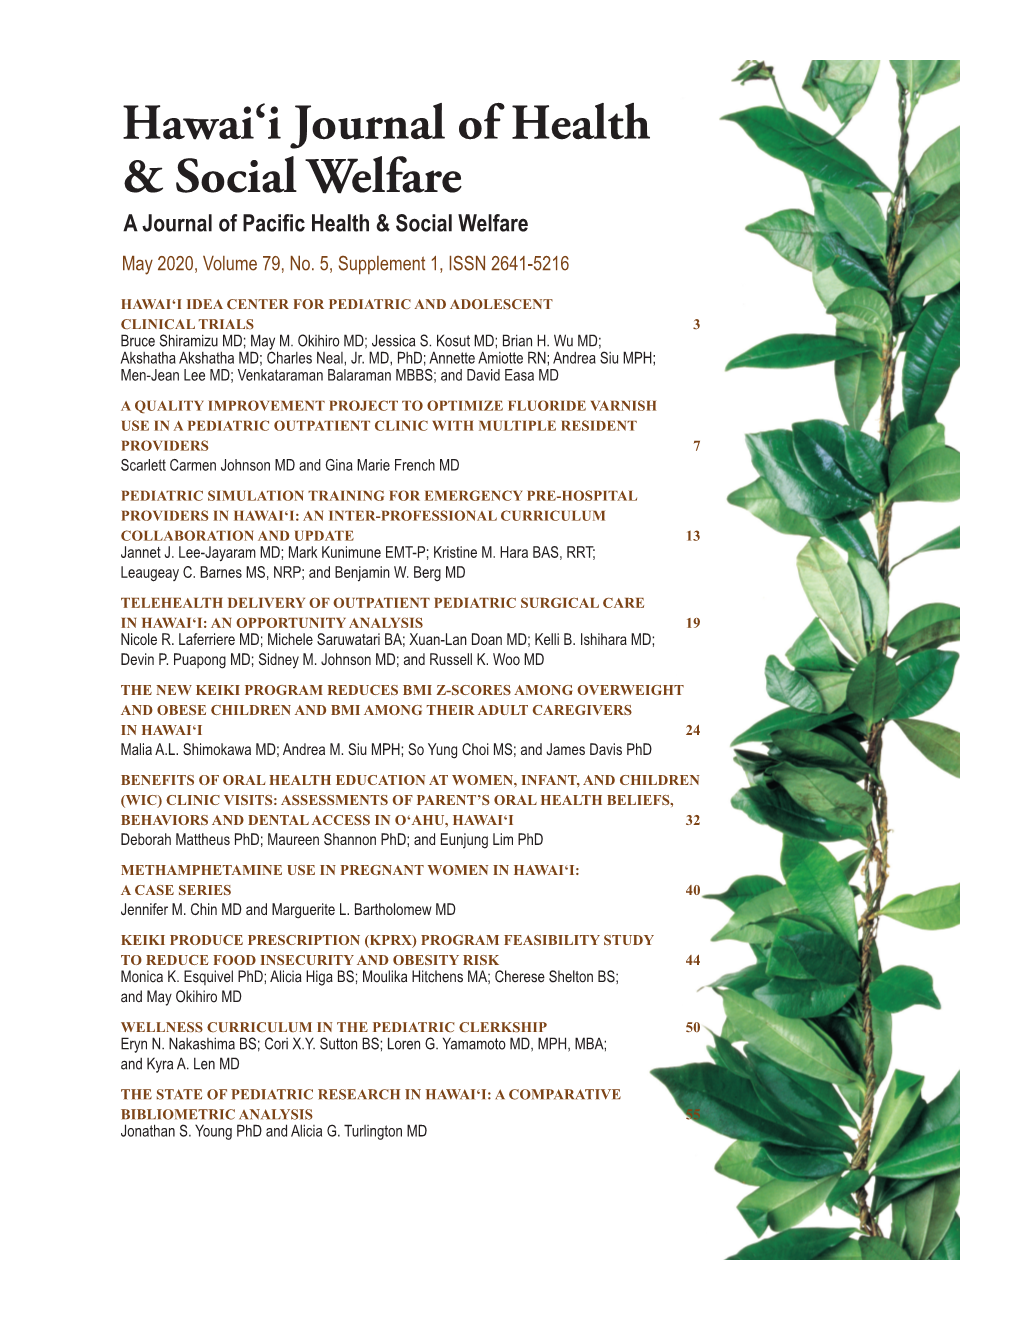 A New Supplement Issue of the Hawaiʻi Journal of Health & Social